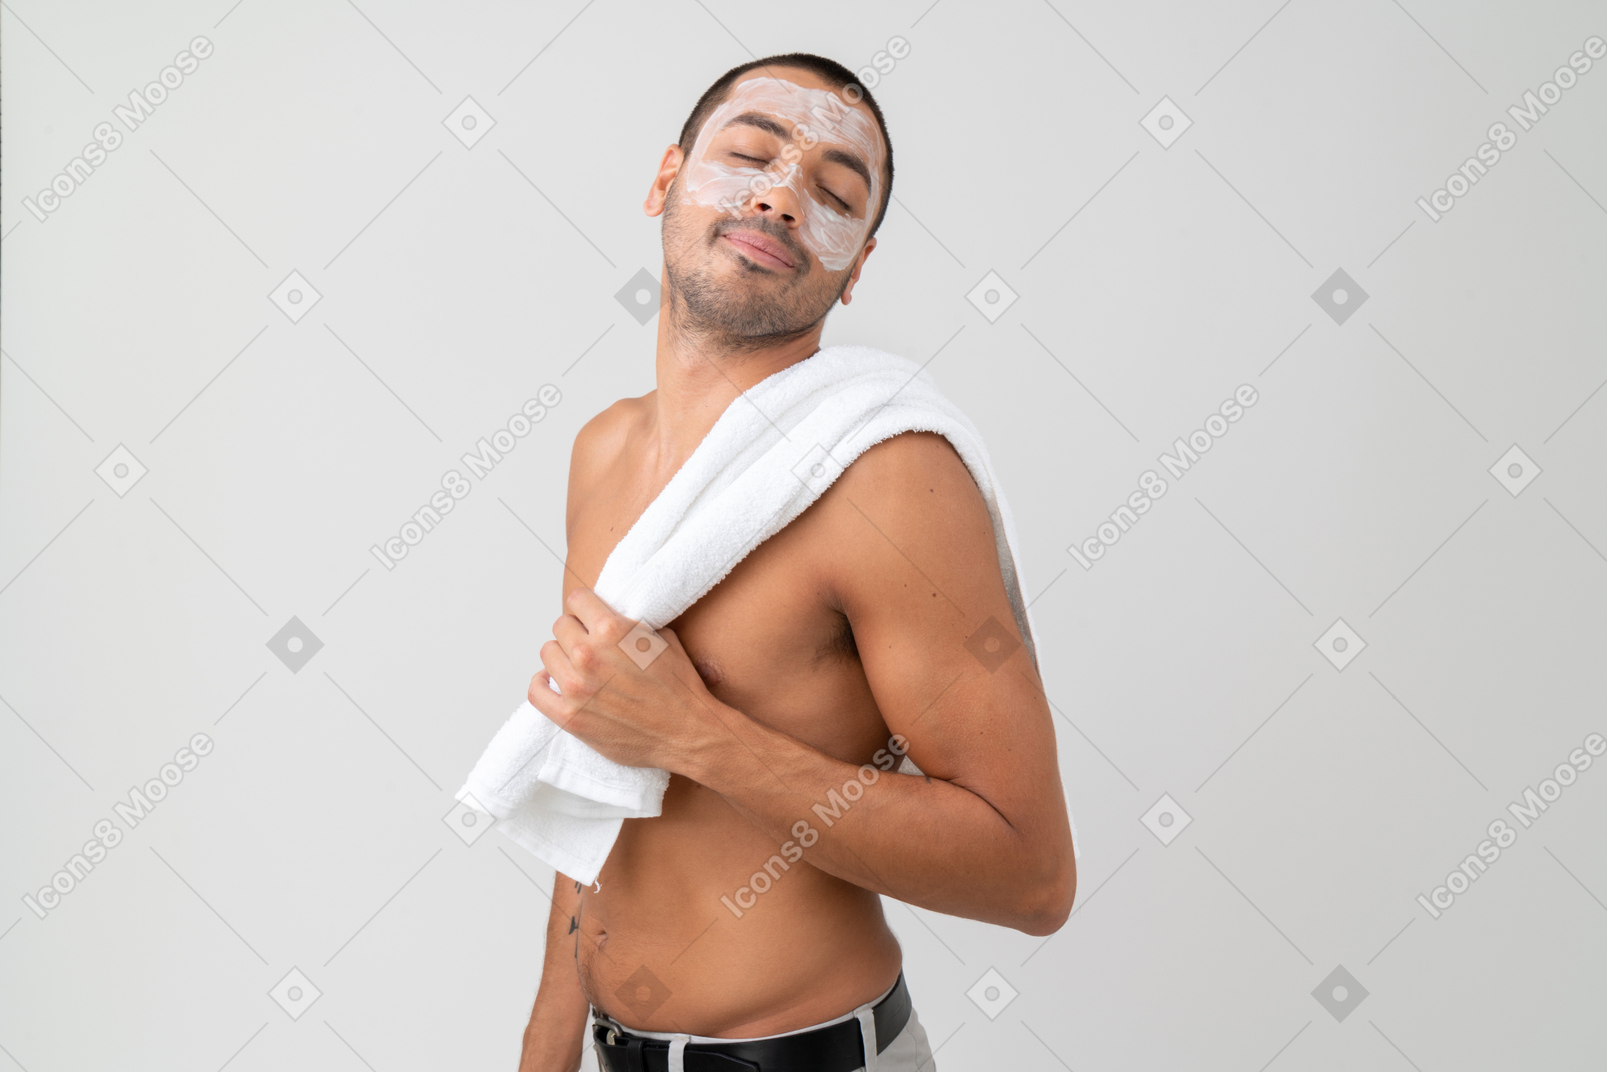 A topless man with moisturizer on his face holding a towel